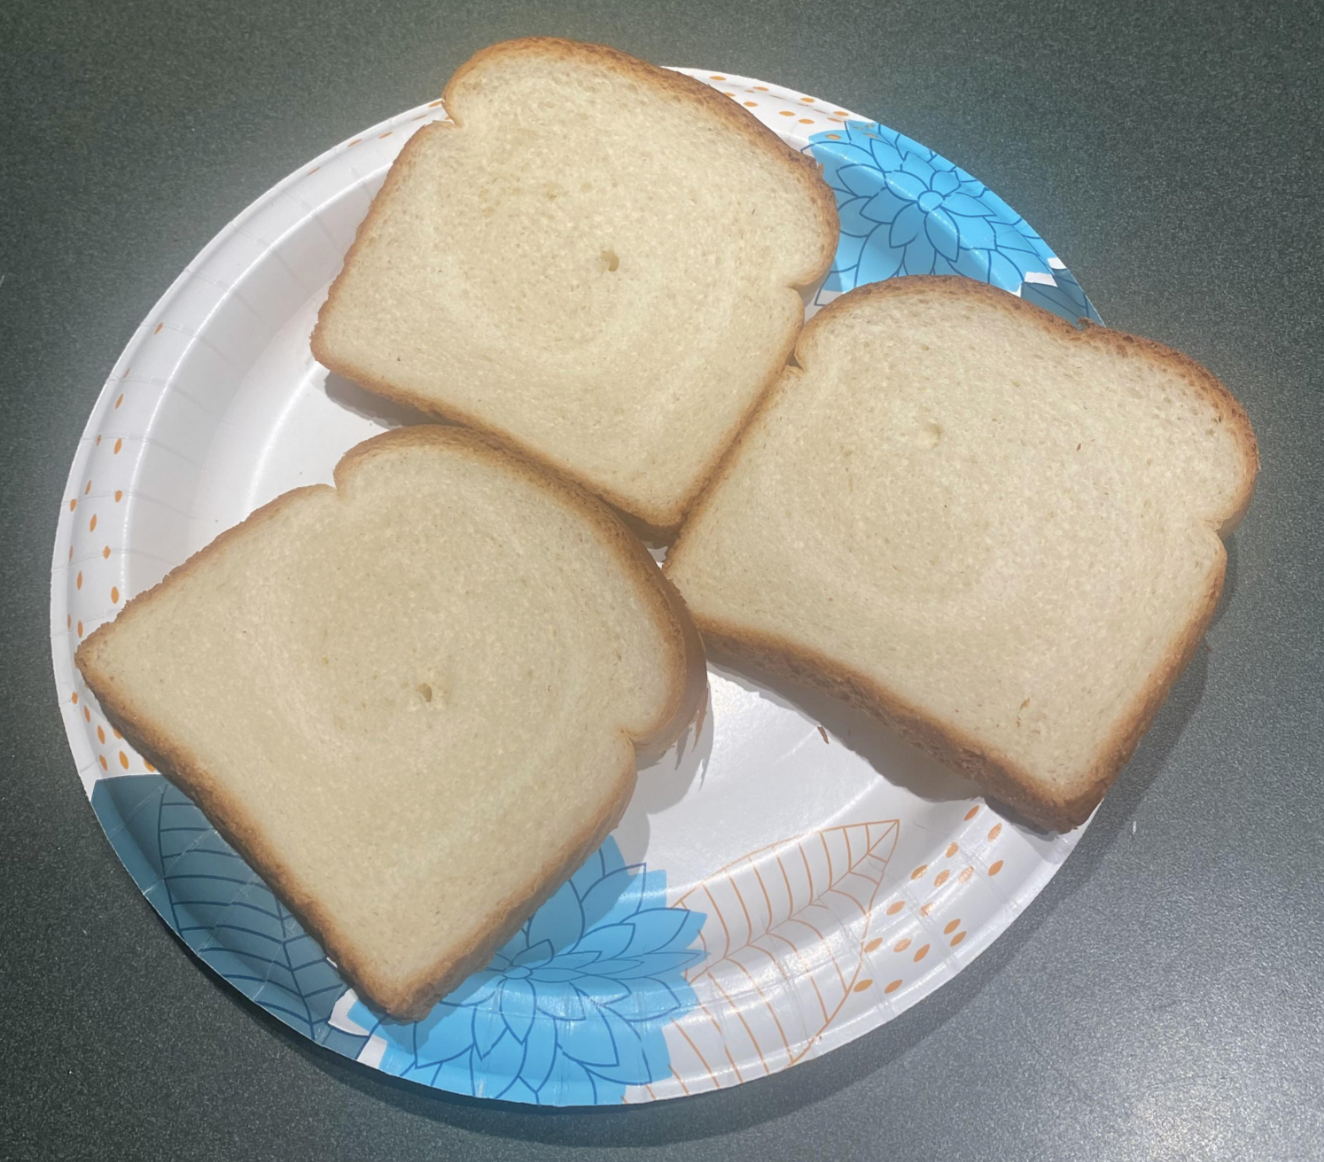 Three slices of white bread on a patterned plate